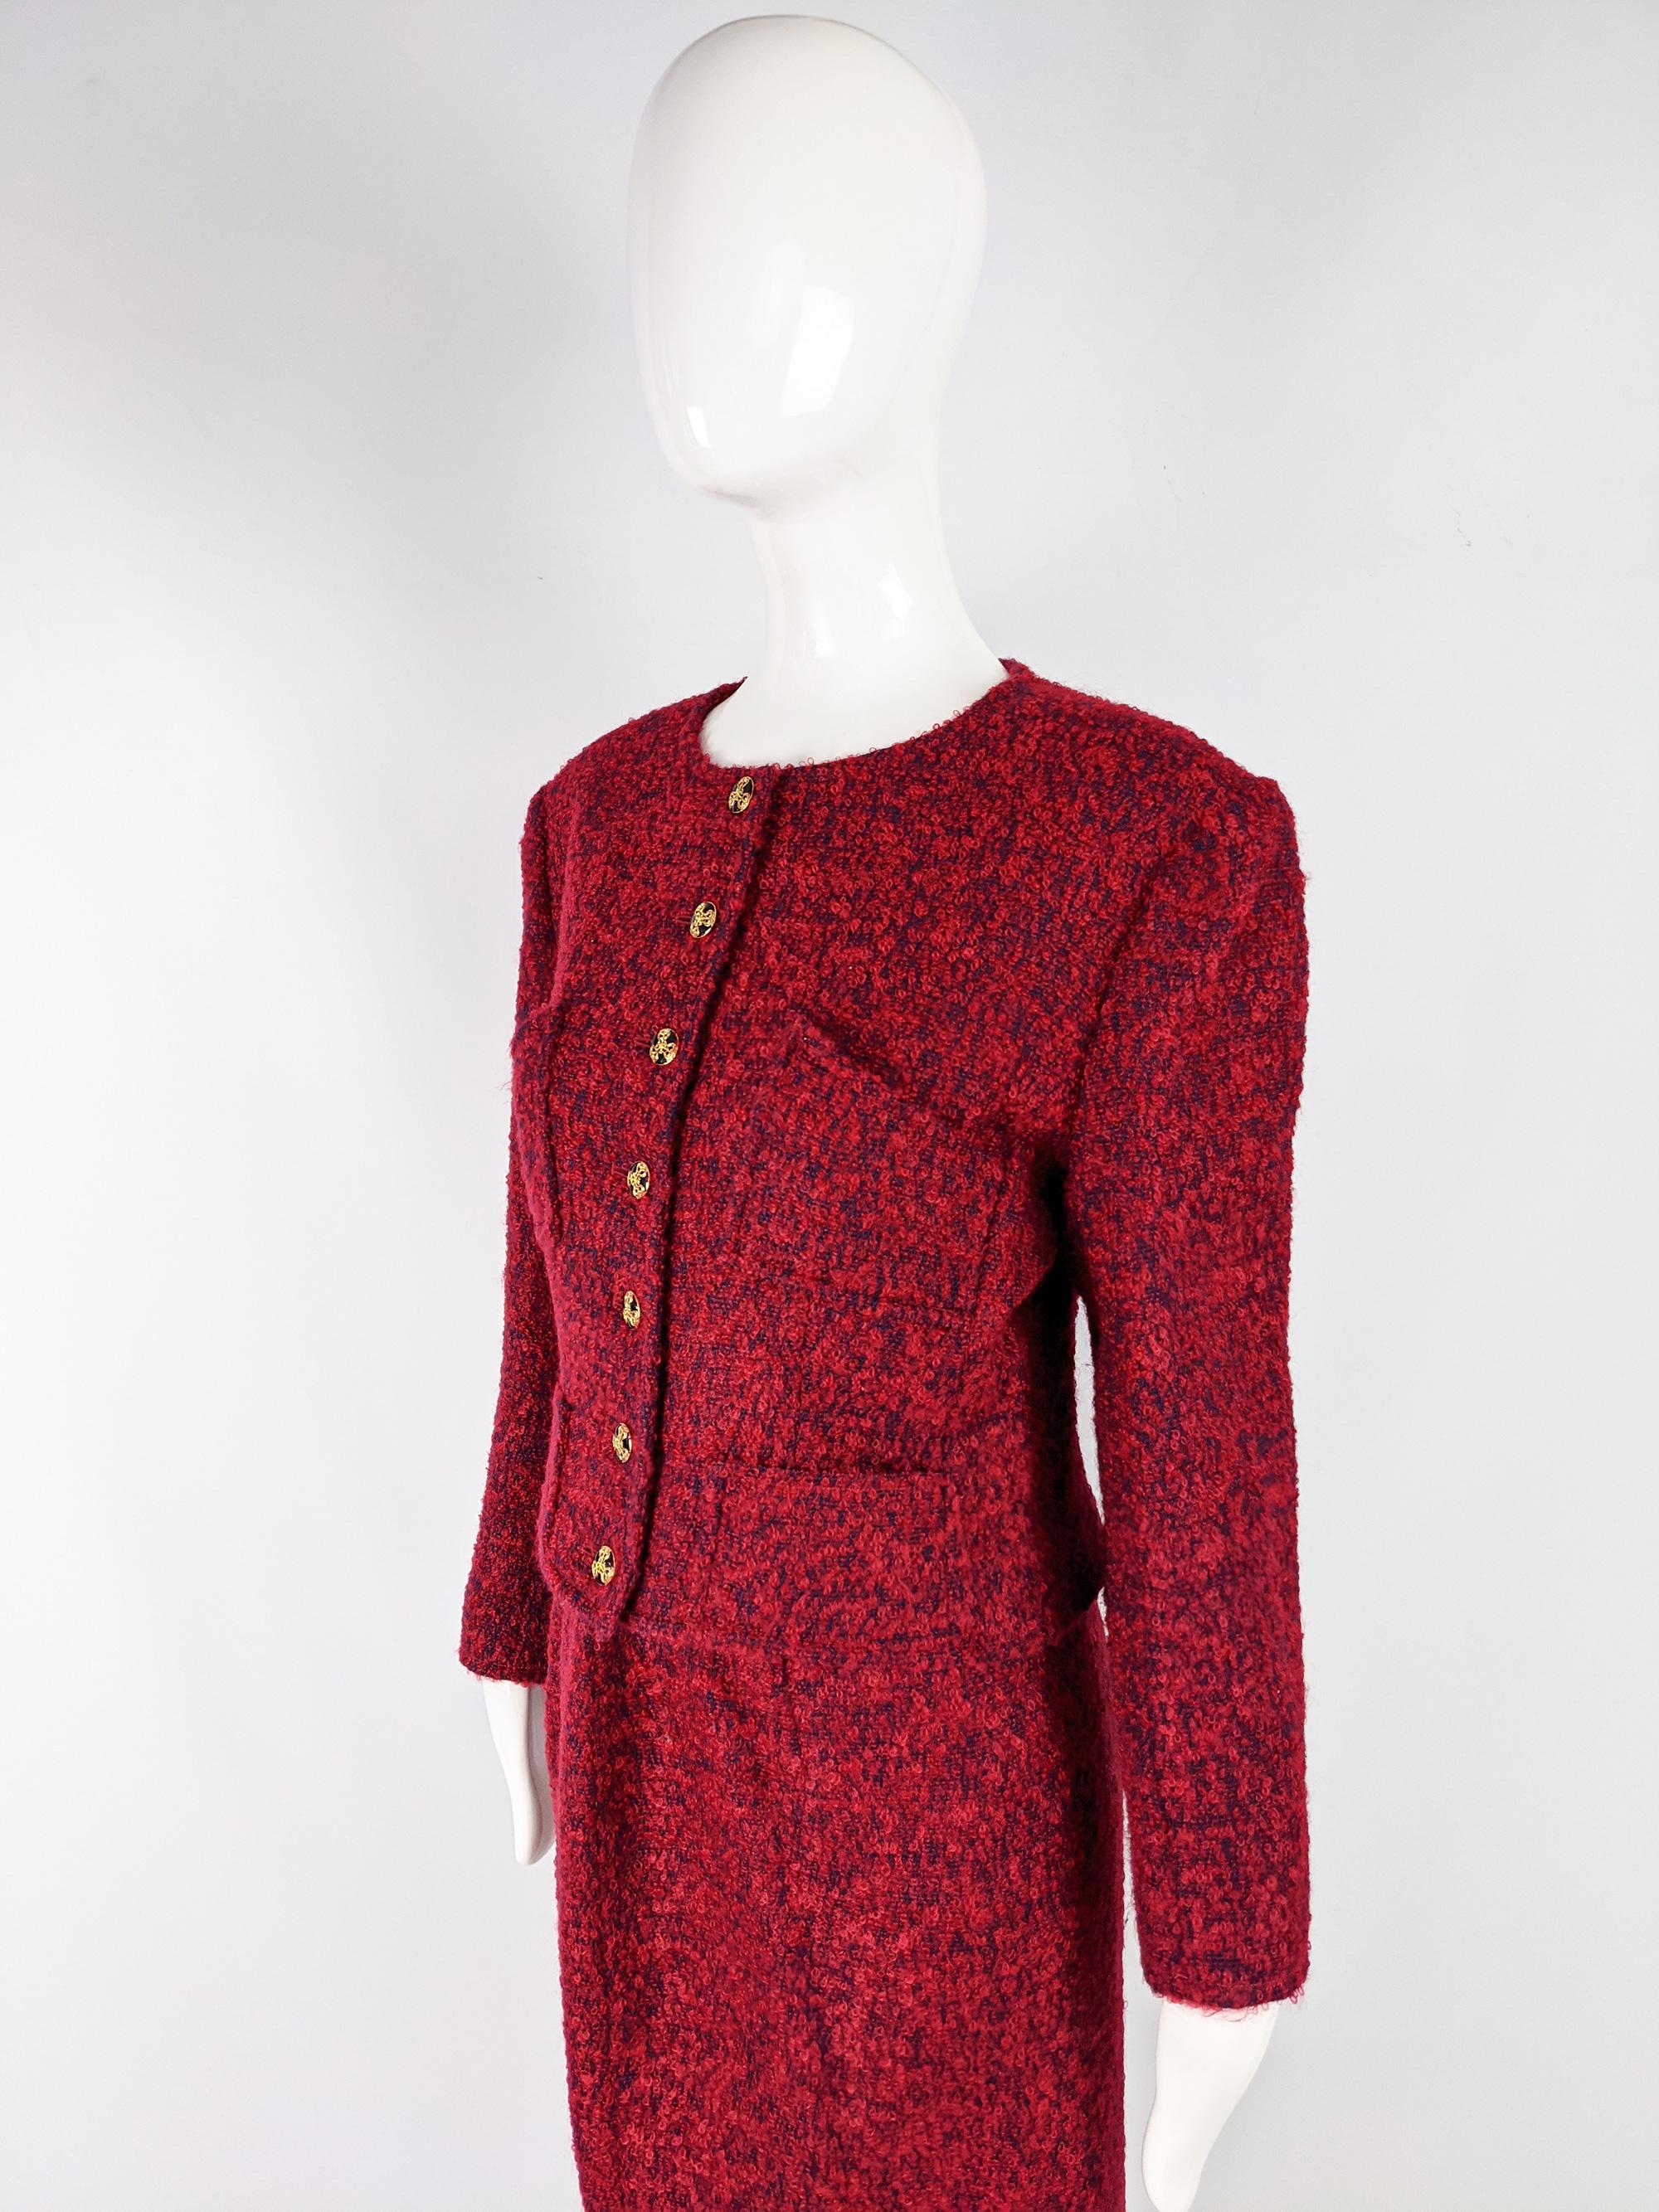 Christian Lacroix Vintage Red Mohair Wool Boucle Tweed Skirt Suit In Excellent Condition For Sale In Doncaster, South Yorkshire